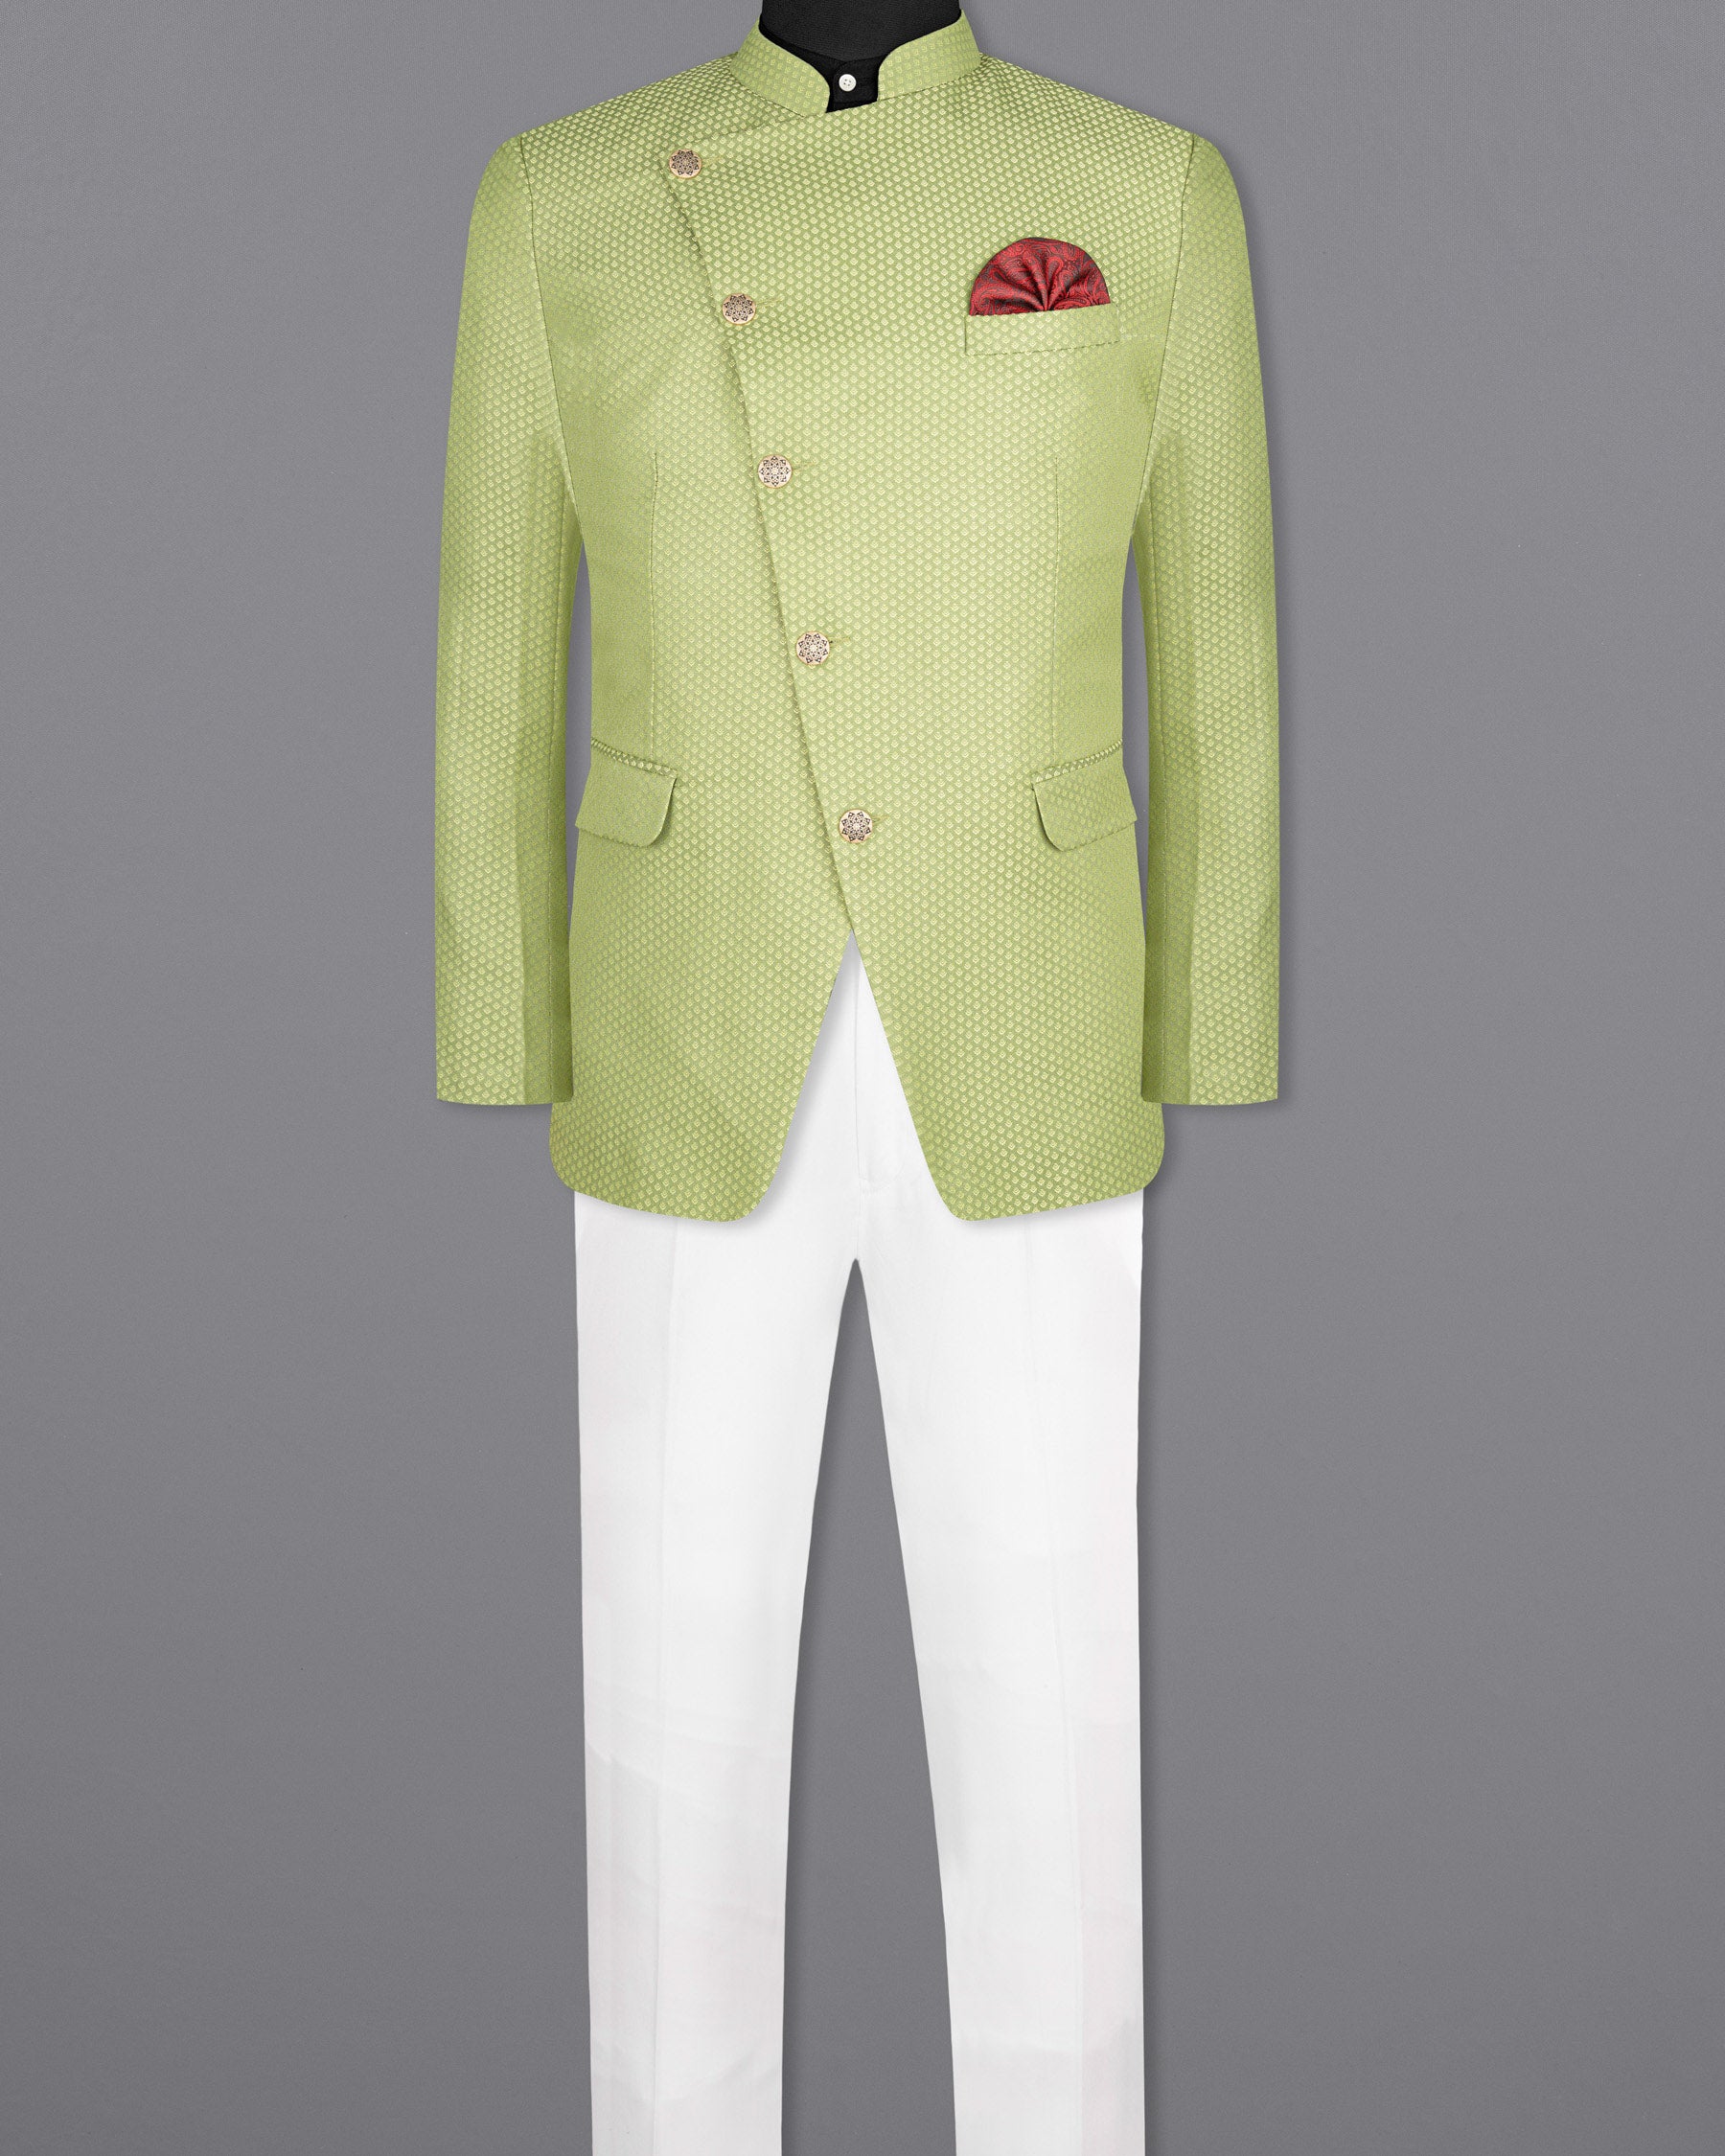 Olivine Green Cross Buttoned Bandhgala Designer Suit ST1674-CBG-38, ST1674-CBG-H-38, ST1674-CBG-39, ST1674-CBG-H-39, ST1674-CBG-40, ST1674-CBG-H-40, ST1674-CBG-42, ST1674-CBG-H-42, ST1674-CBG-44, ST1674-CBG-H-44, ST1674-CBG-46, ST1674-CBG-H-46, ST1674-CBG-48, ST1674-CBG-H-48, ST1674-CBG-50, ST1674-CBG-H-50, ST1674-CBG-52, ST1674-CBG-H-52